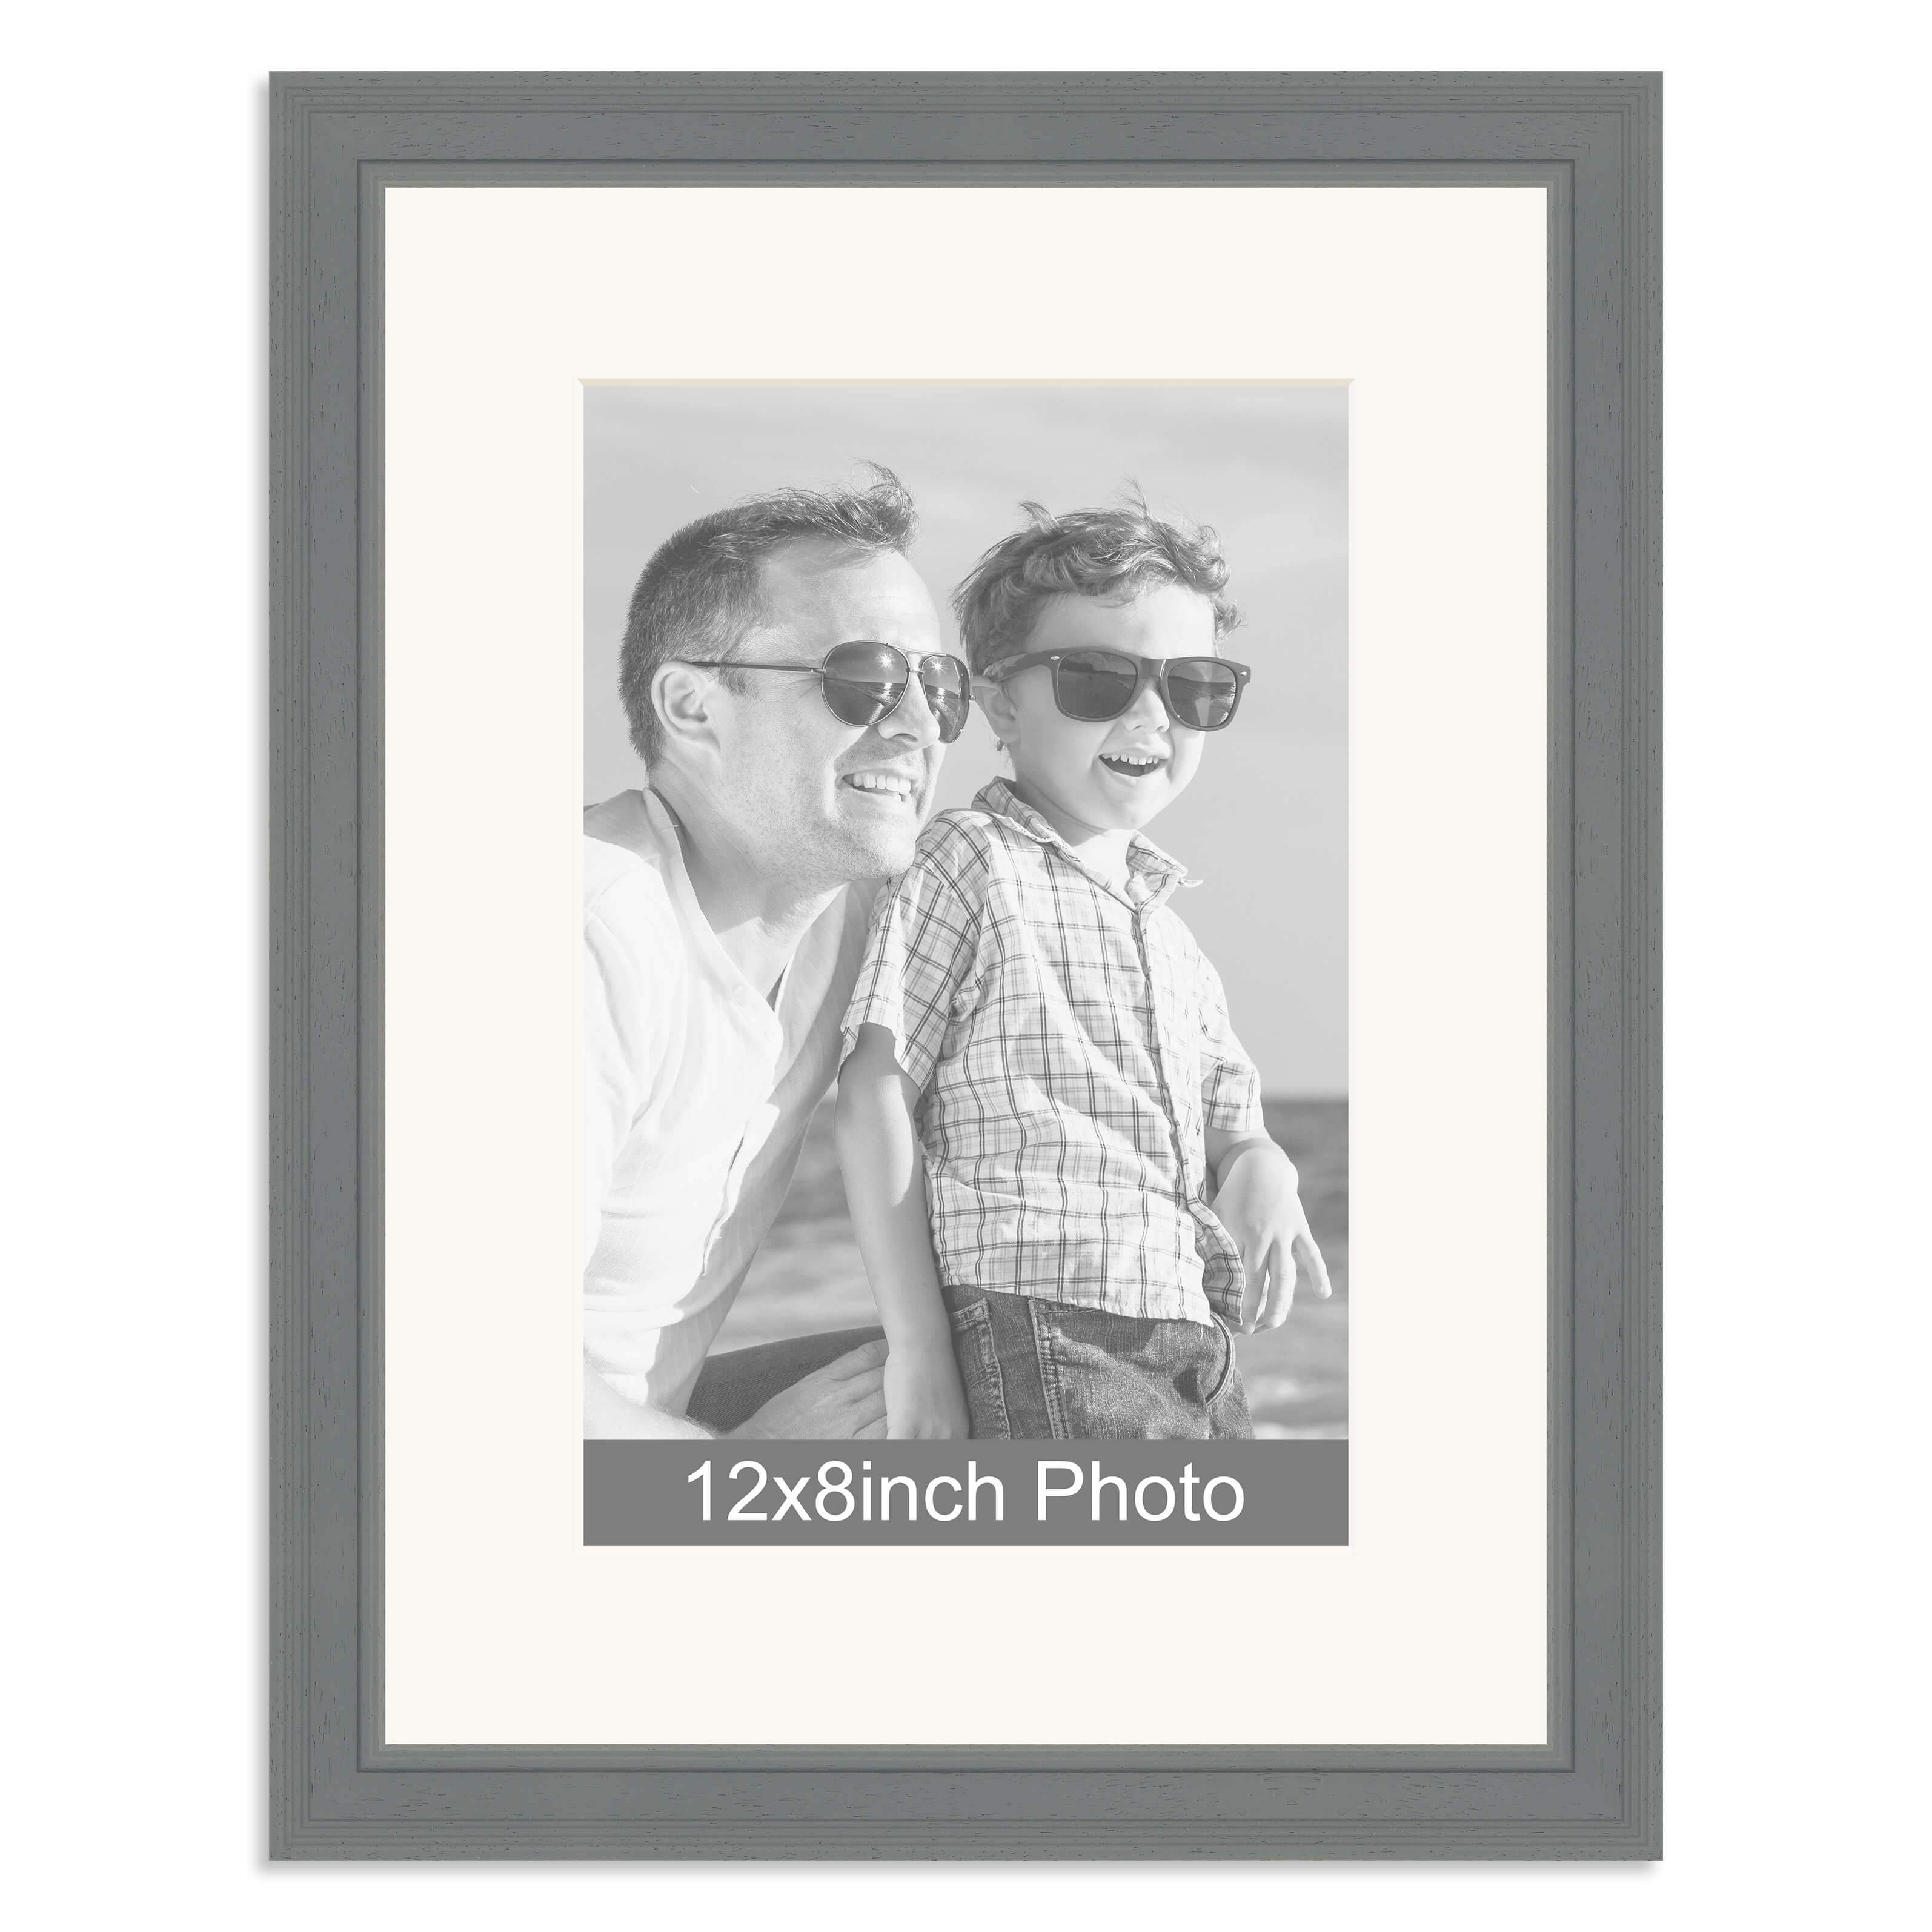 Grey Wooden Photo Frame for a 12×8/8x12in Photo – Photo to follow by email